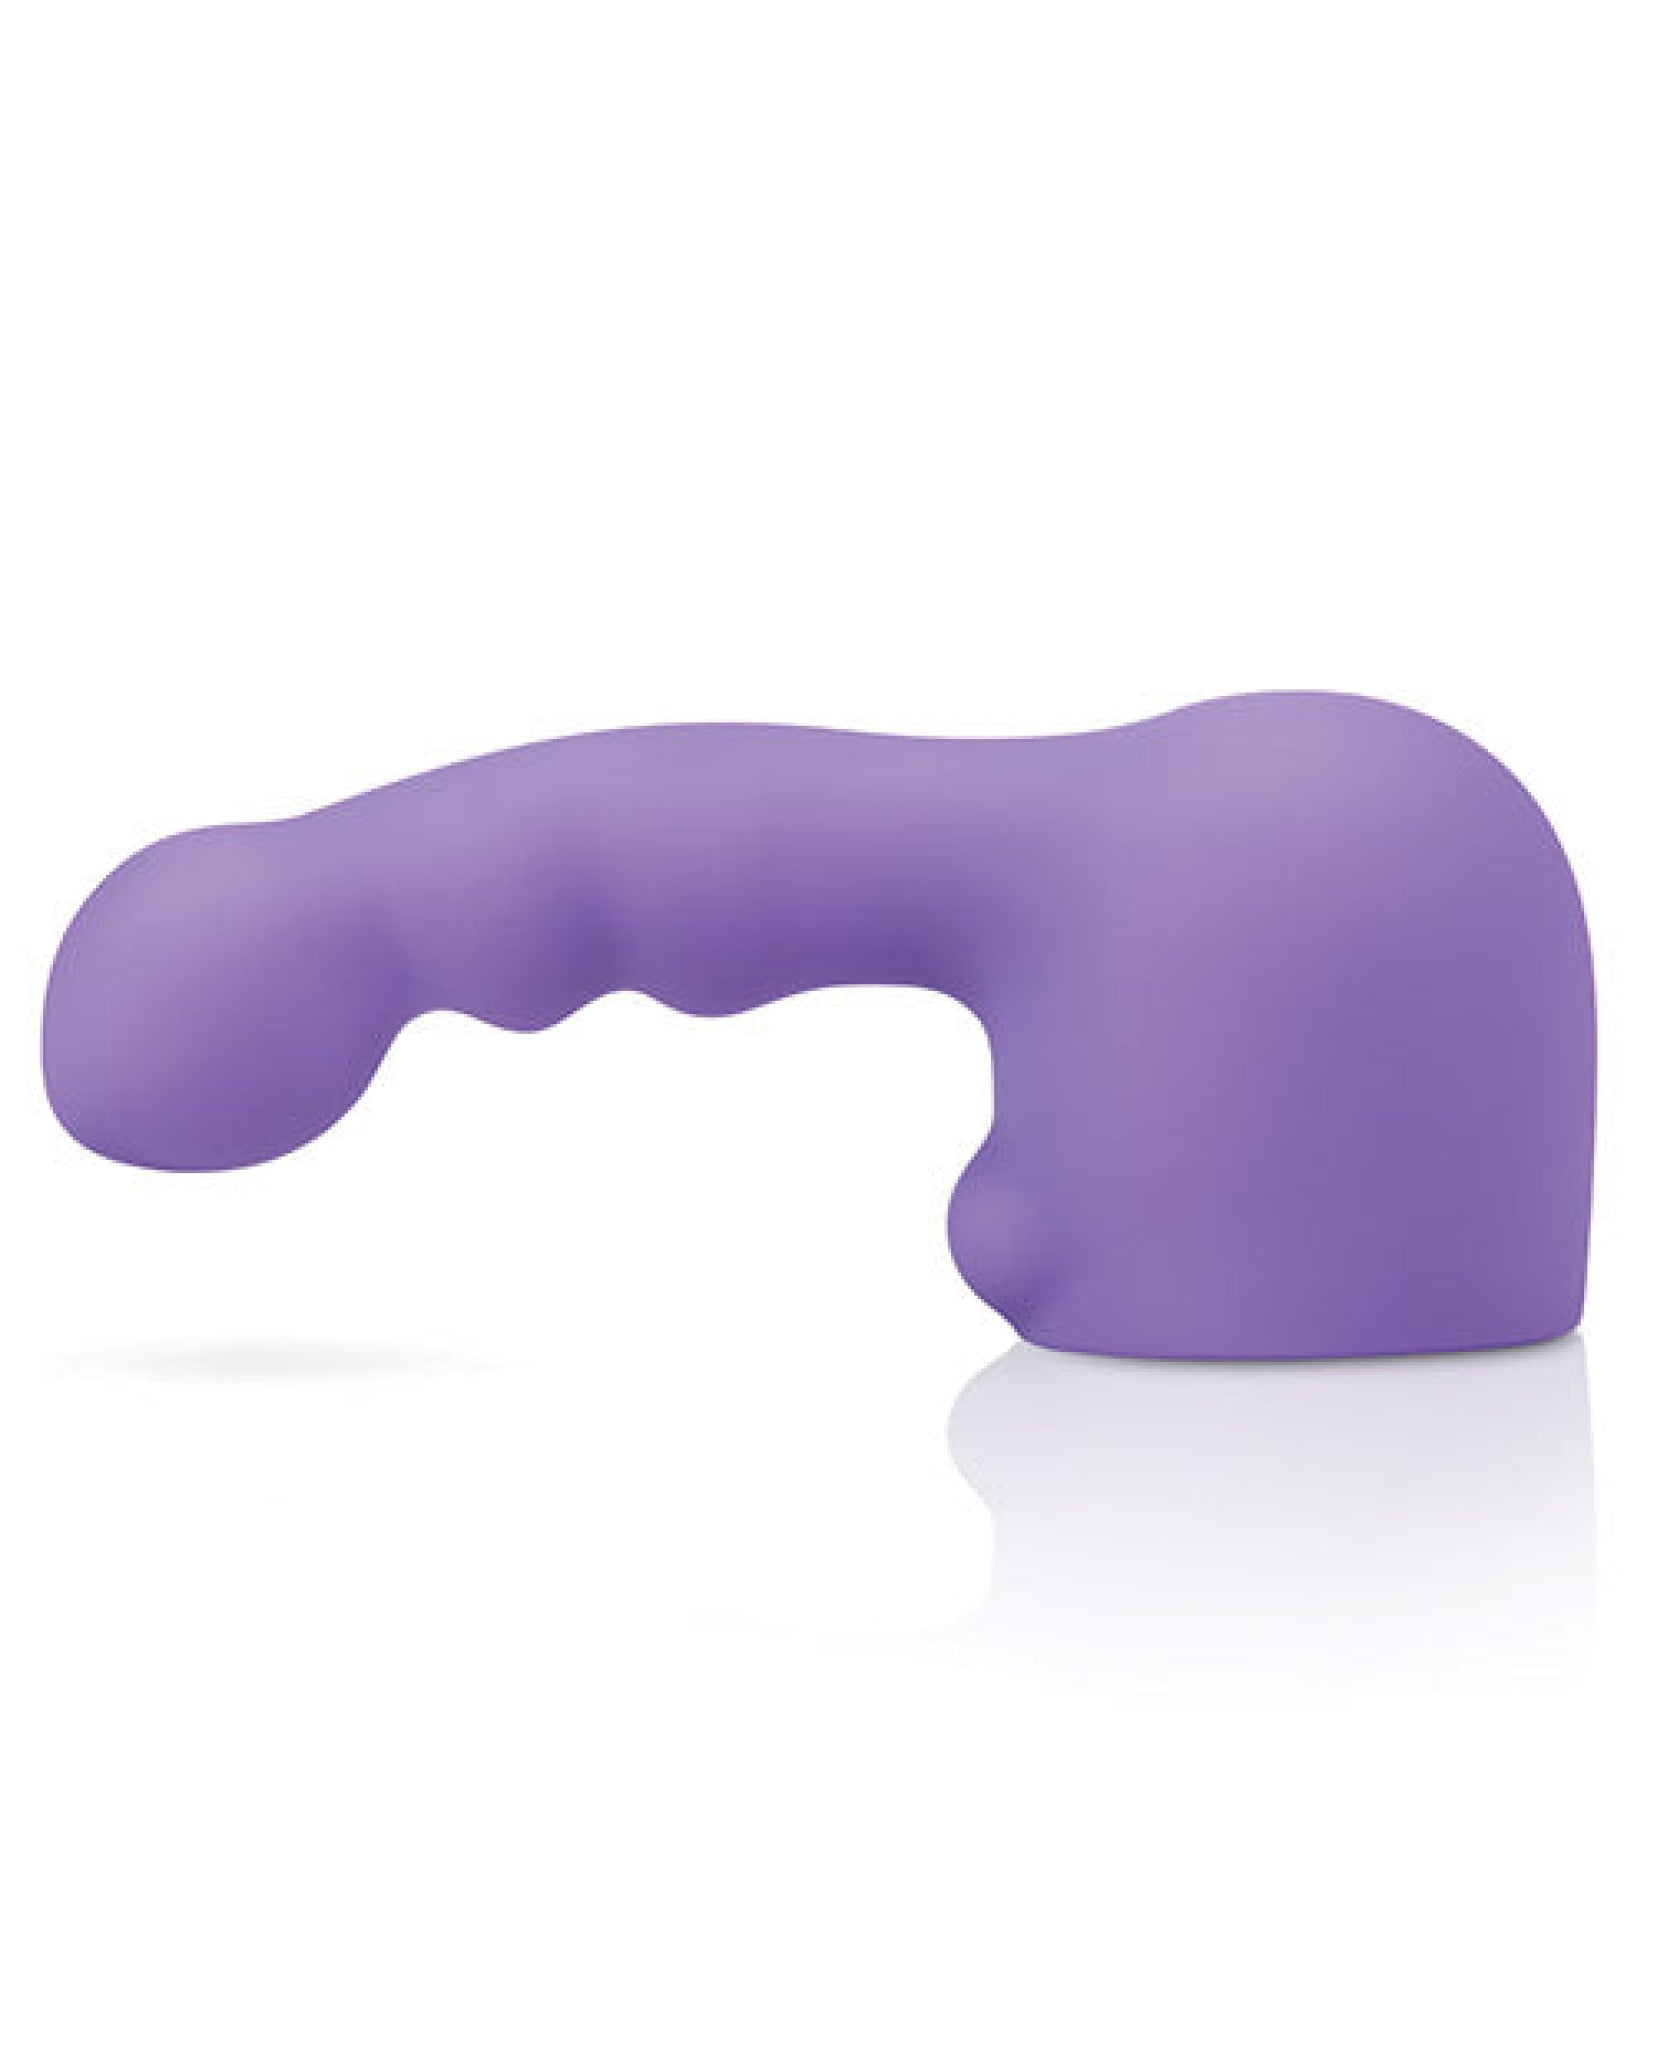 Le Wand Ripple Petite Weighted Silicone Attachment Le Wand